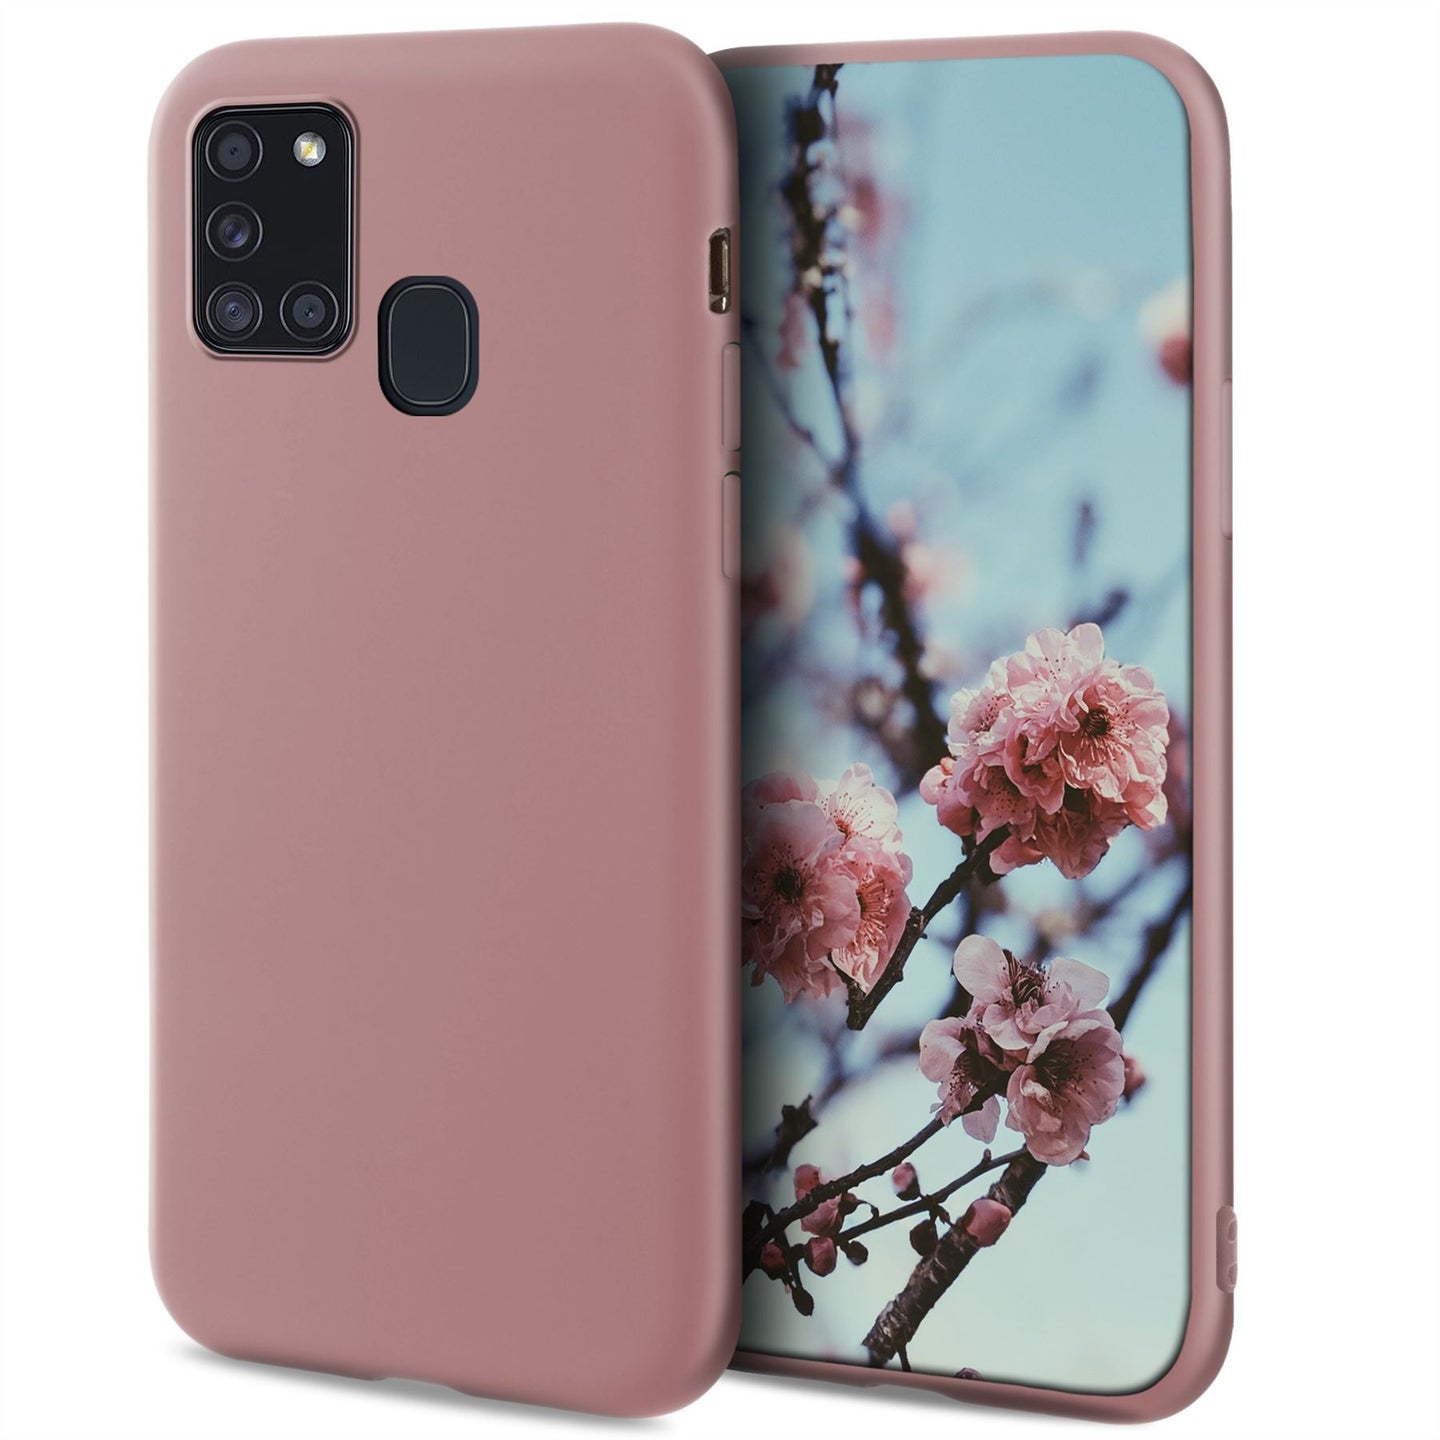 Moozy Minimalist Series Silicone Case for Samsung A21s, Rose Beige - Matte Finish Slim Soft TPU Cover